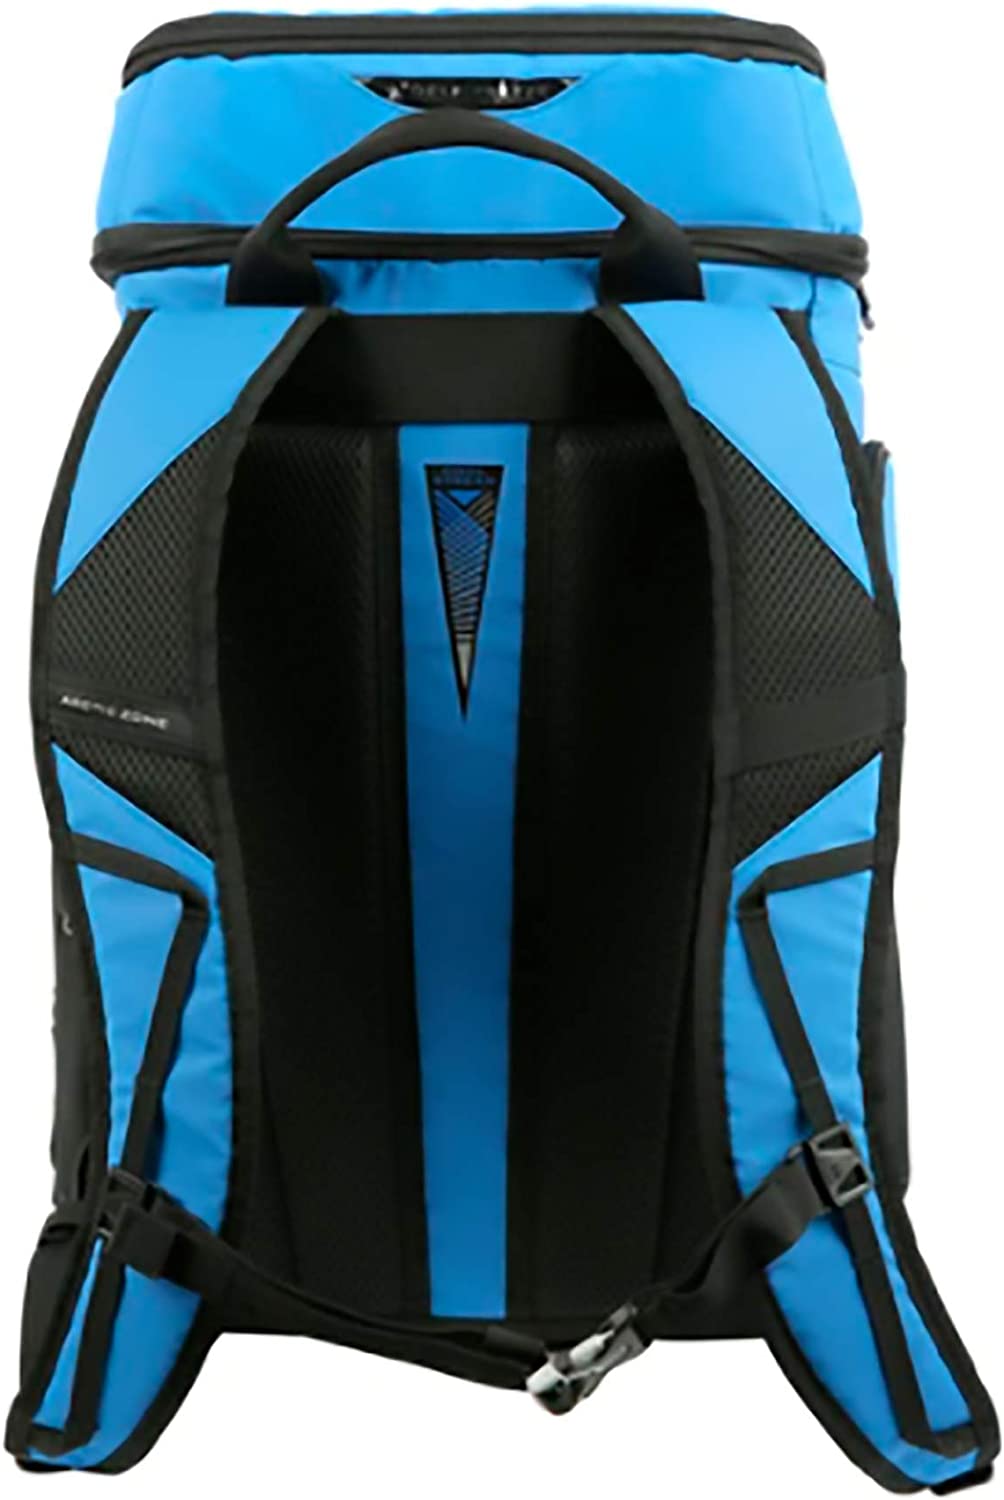 Titan Deep Freeze 26 Can Backpack Cooler Up To 2 Days Easy Clean Leak Proof